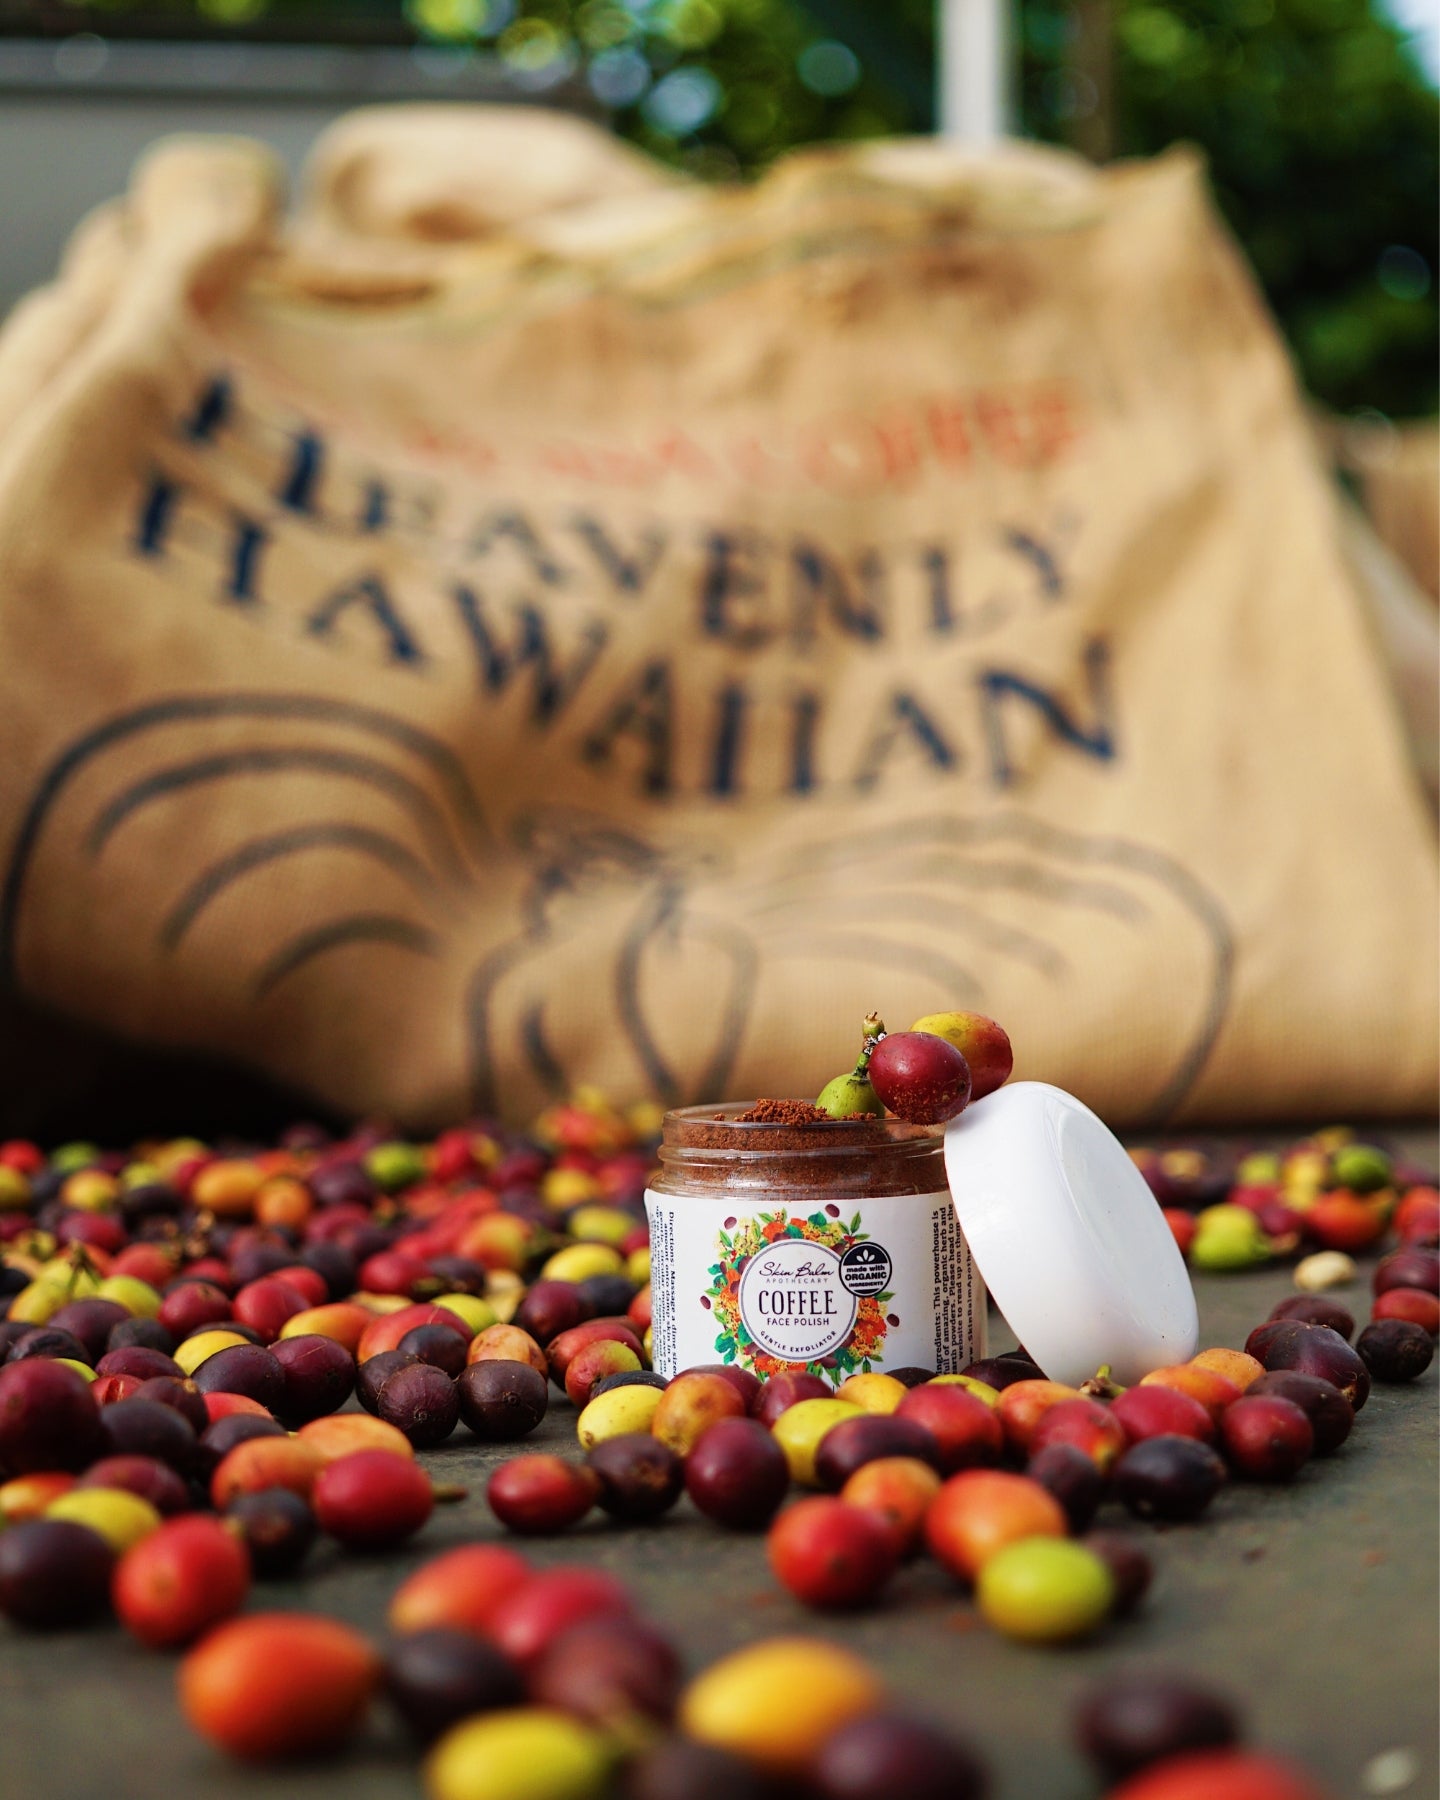 Coffee Face Polish surrounded by coffee cherries with a burlap sack blurred in the background.